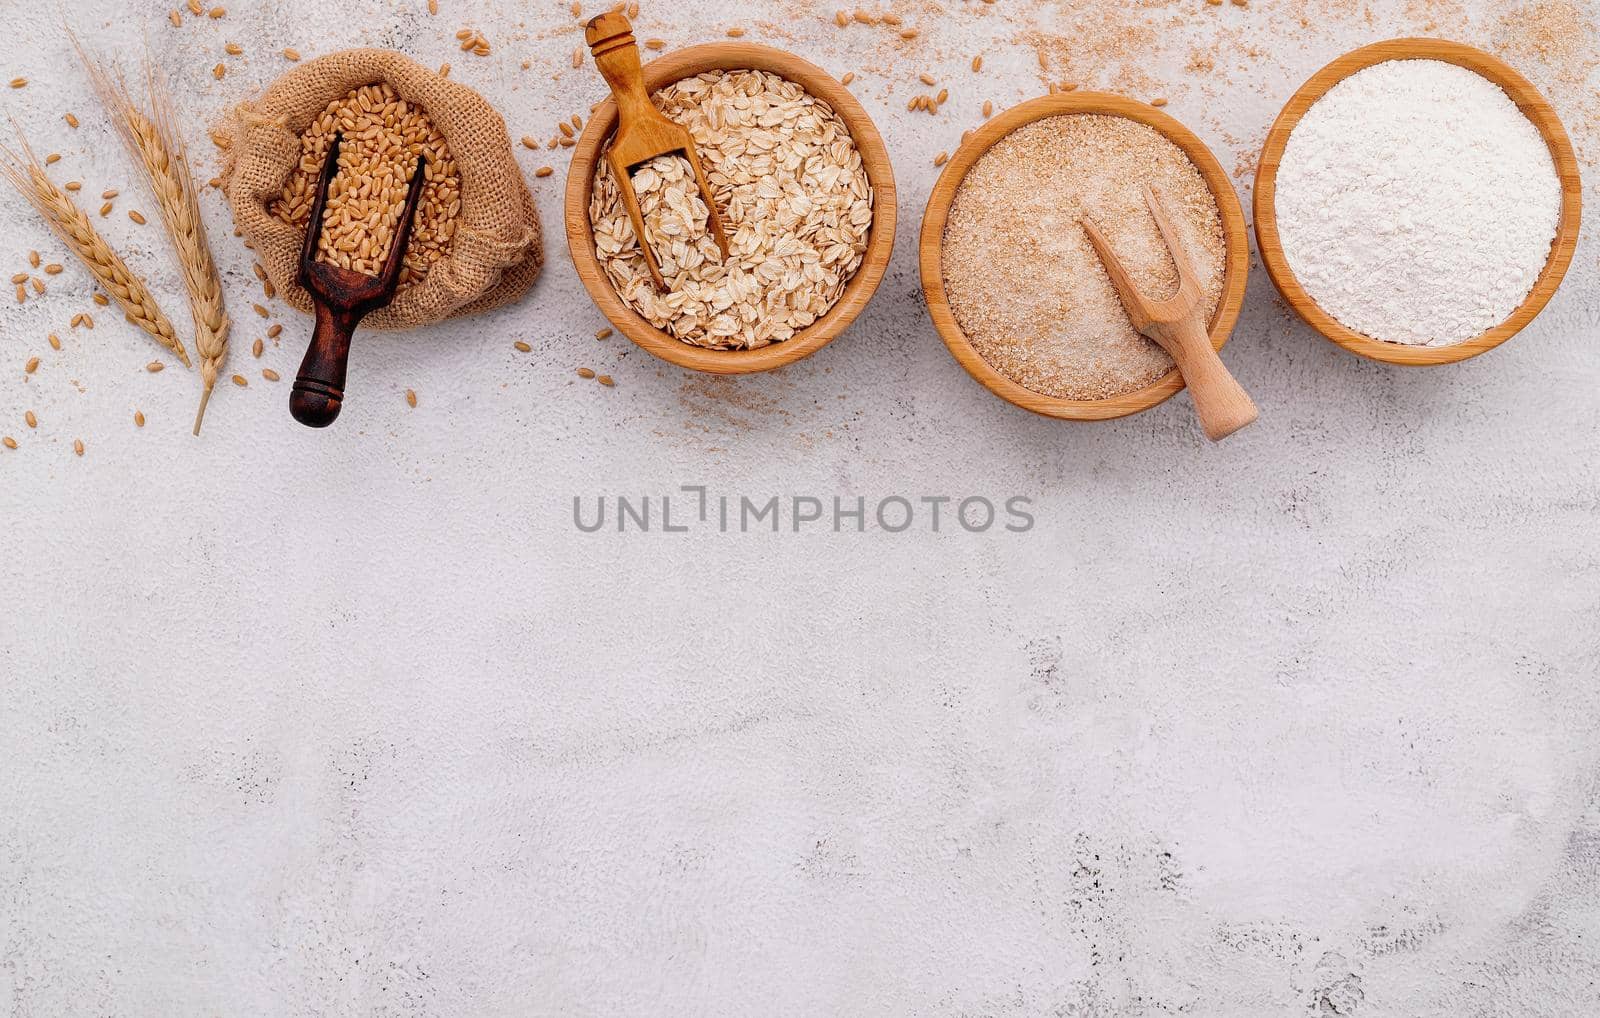  Wheat grains , brown wheat flour and white wheat flour in wooden bowl set up on white concrete background. by kerdkanno